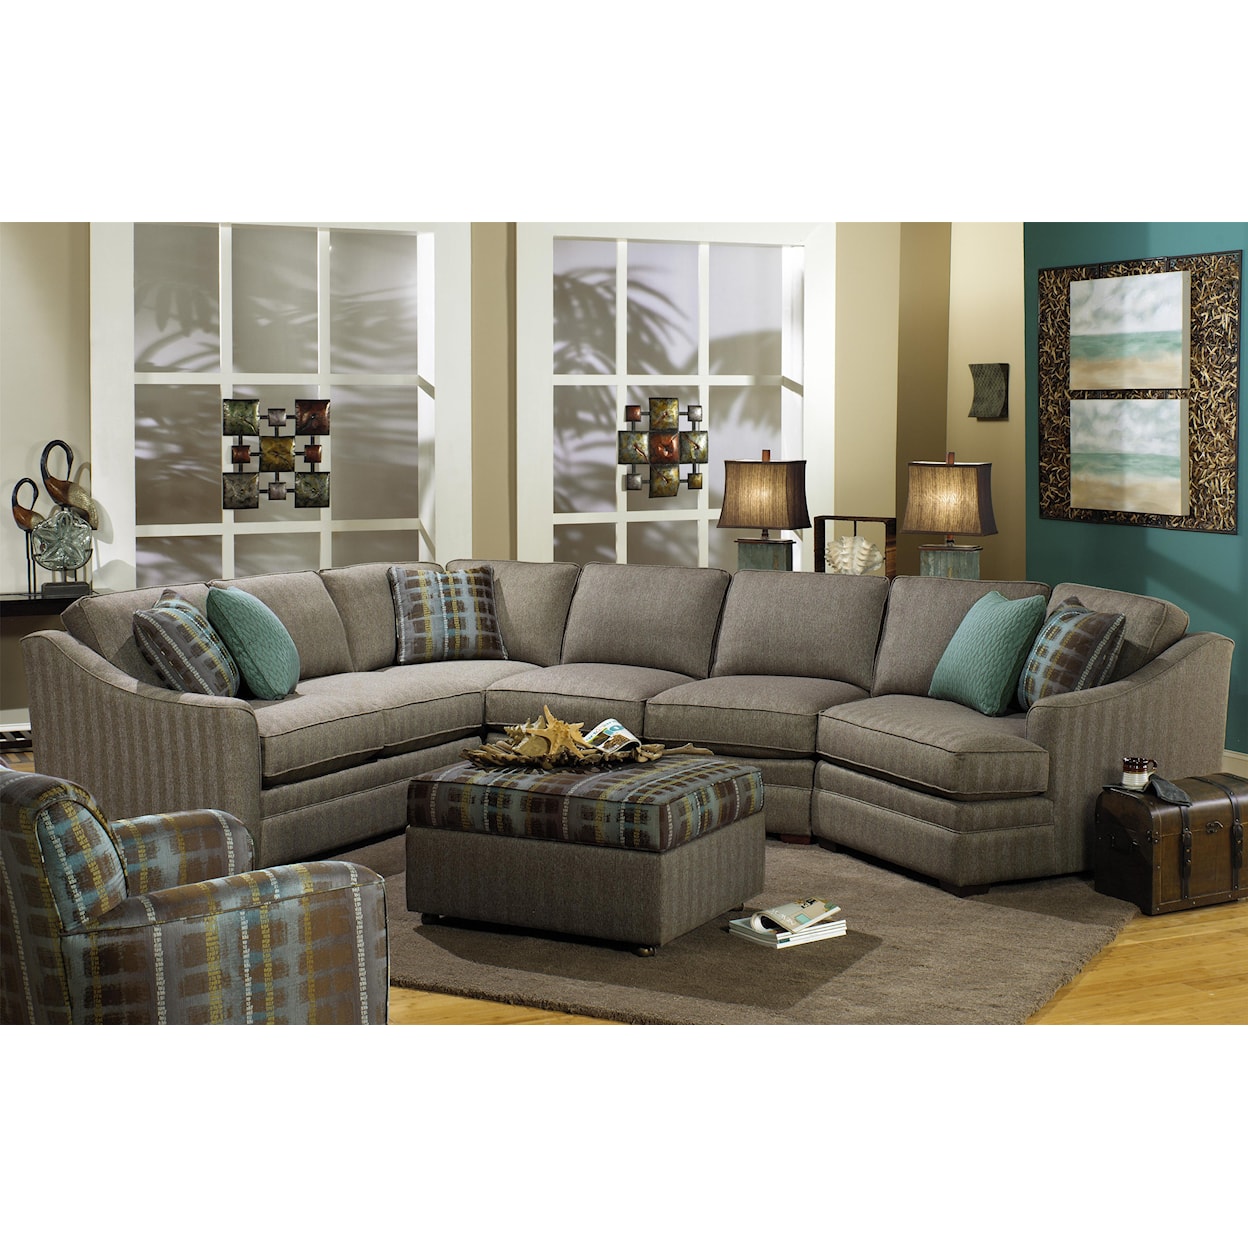 Craftmaster F9 Design Options 3-Piece Sectional Sofa with RAF Cuddler